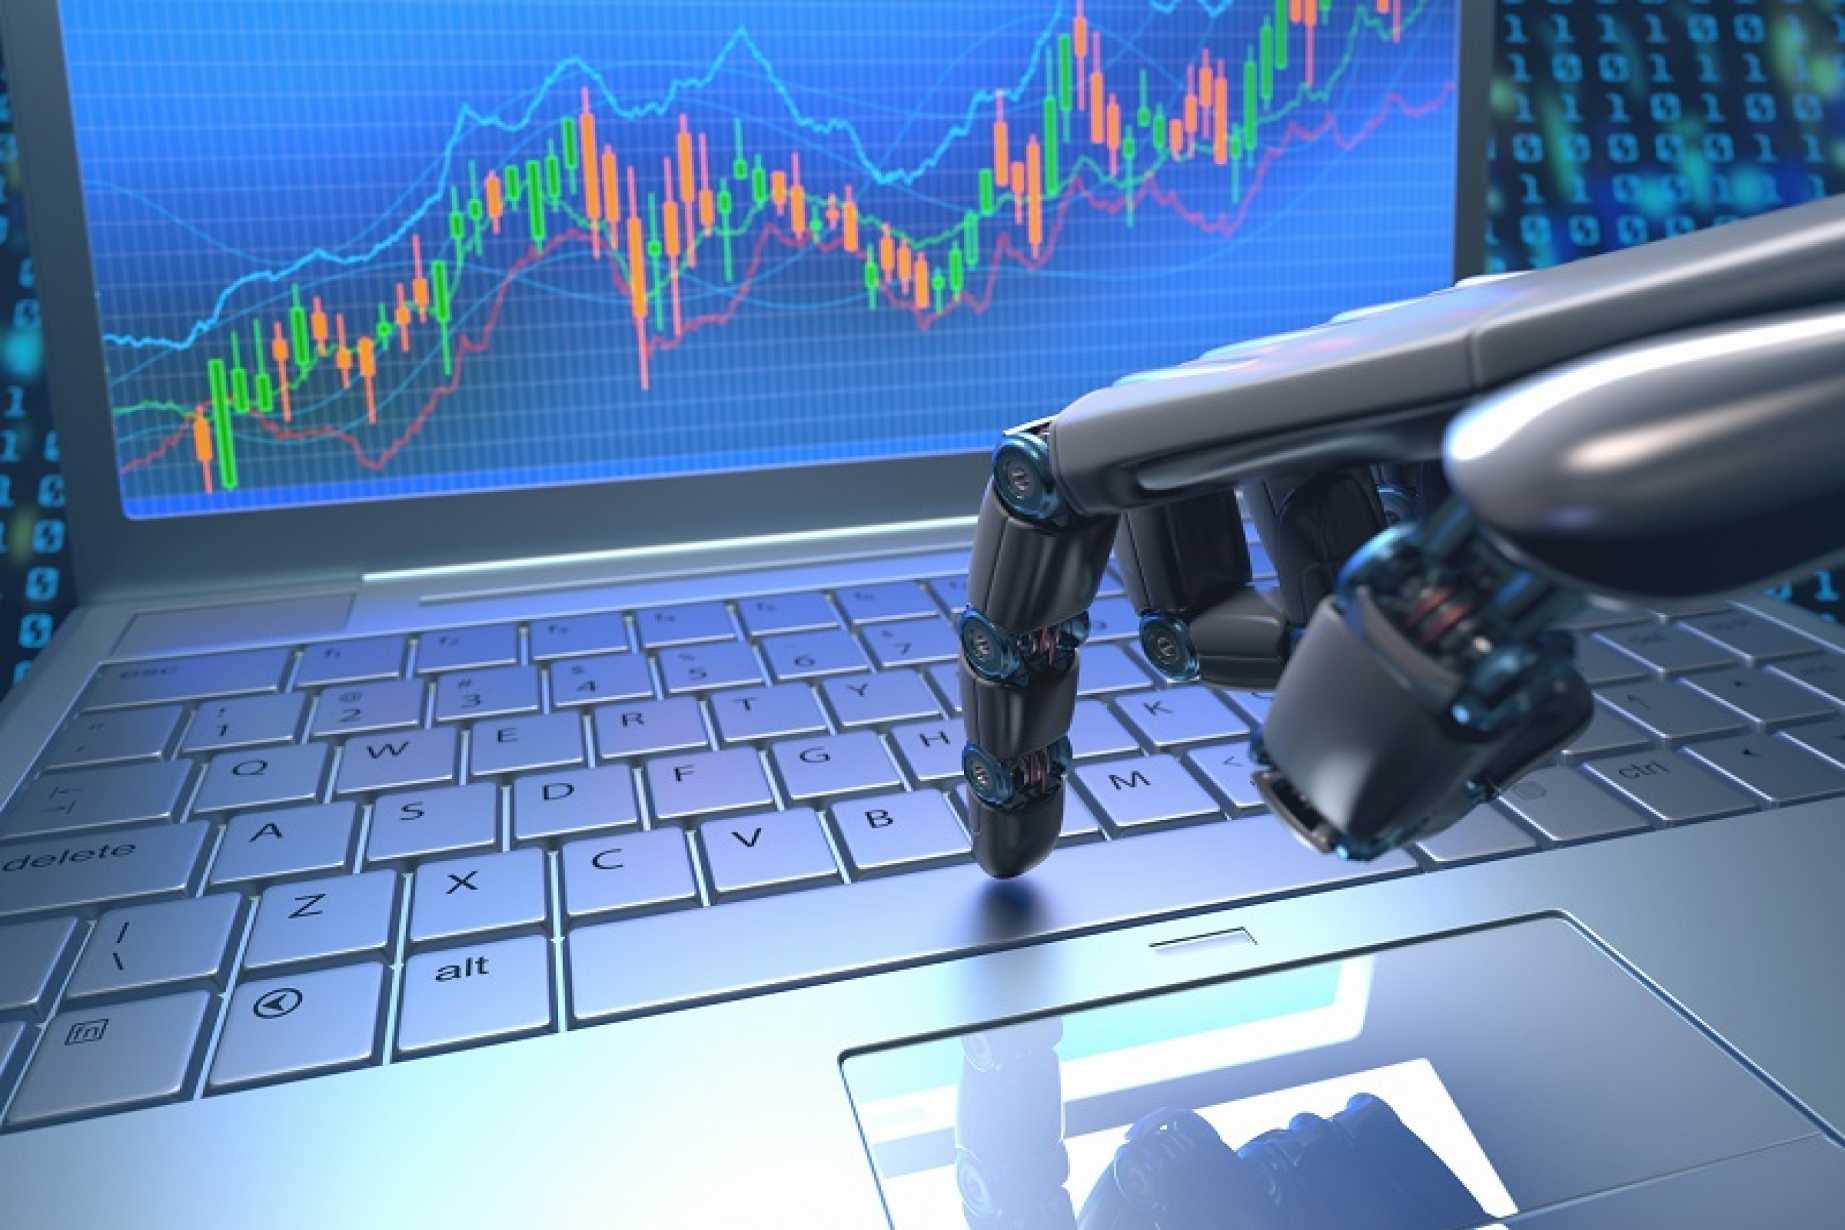 Copy-trading: Pros and Cons of Automated Trading